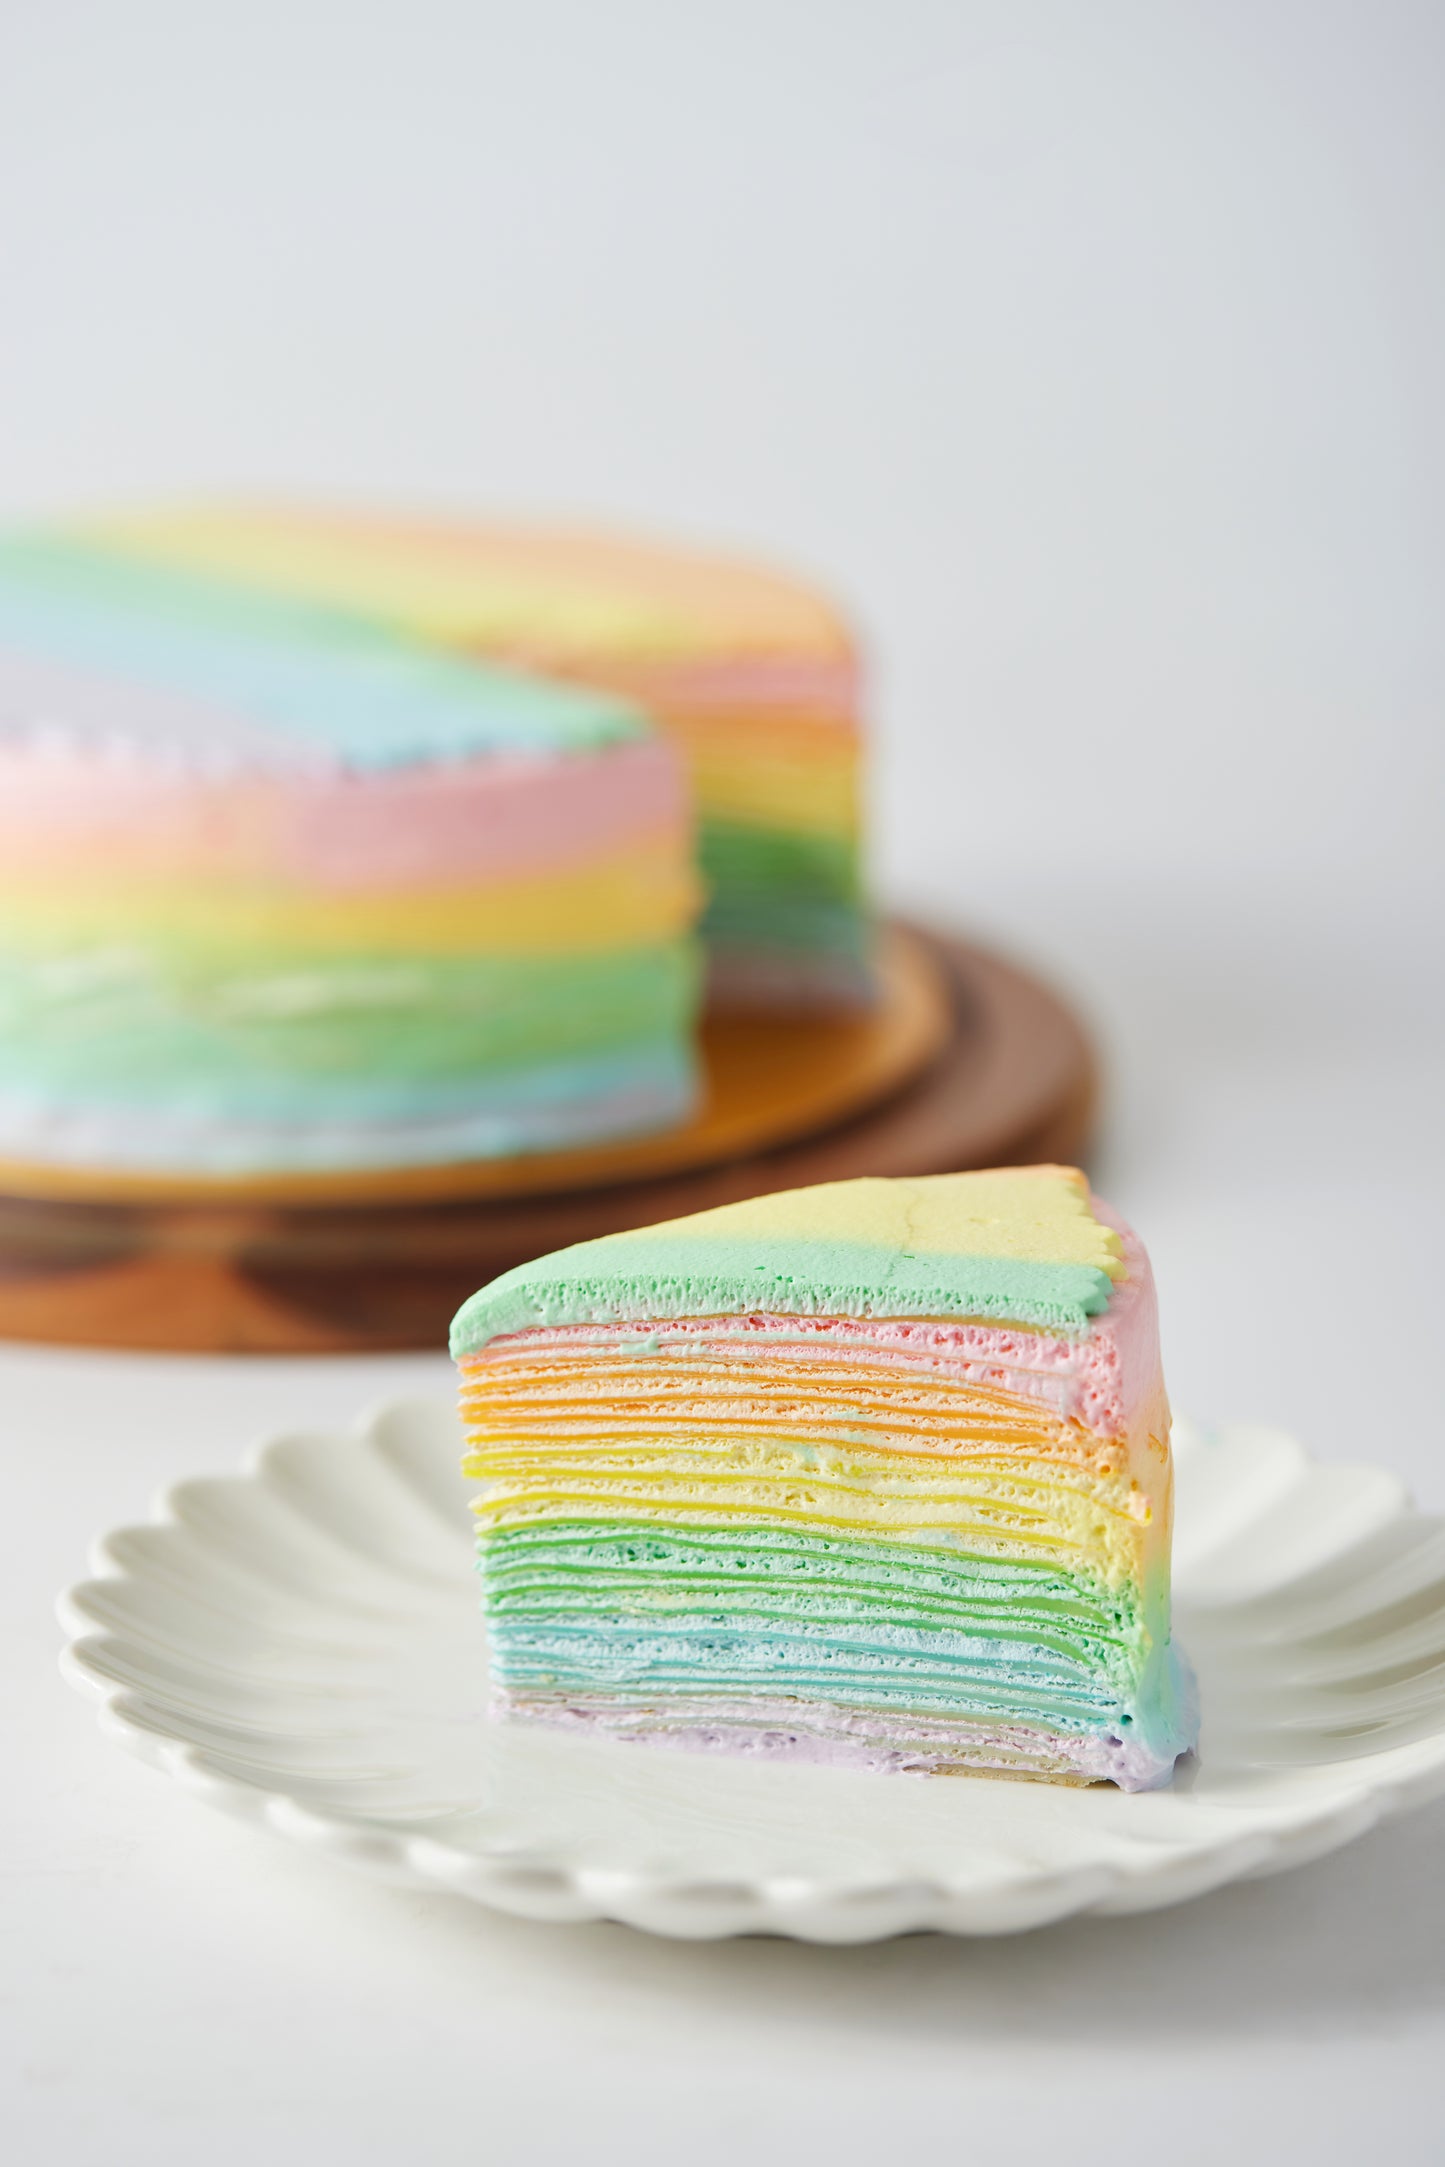 Rainbow vanilla crepe cake 6" 🌈(with mix sauce)  suitable for 6-8 pax